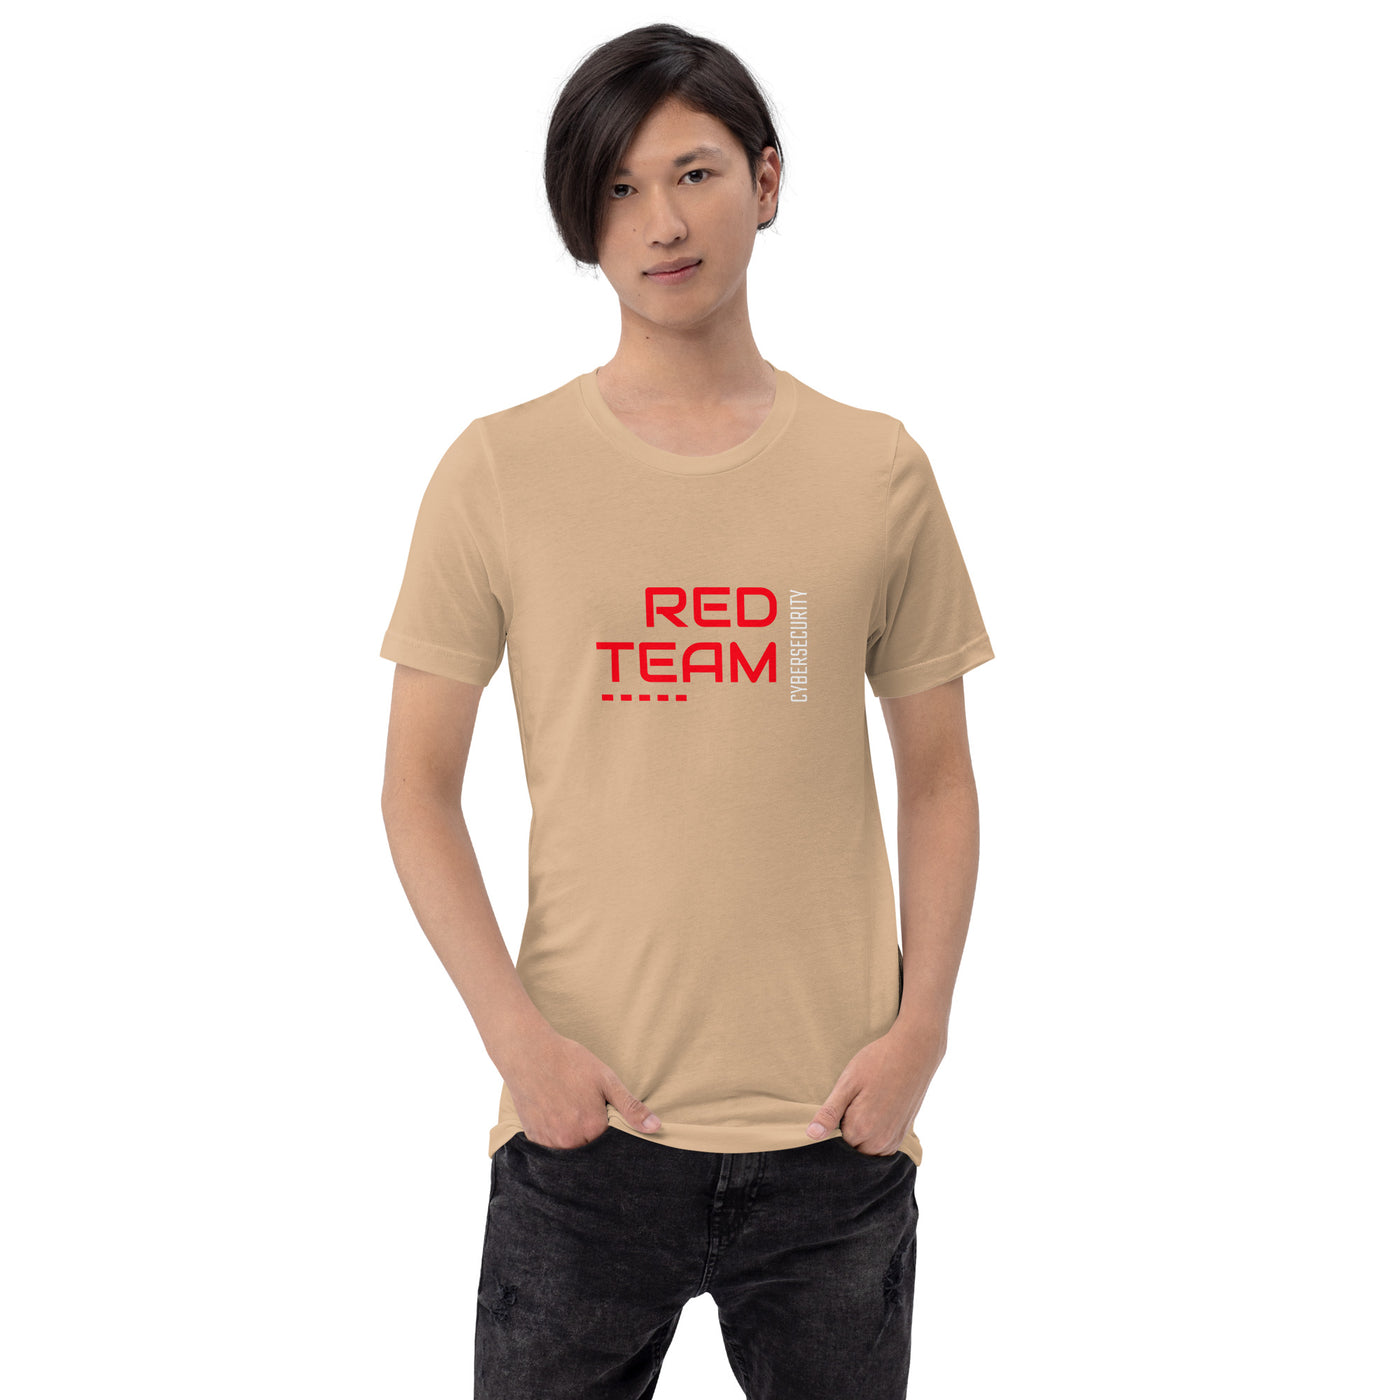 Cyber Security Red Team V14 - Unisex t-shirt